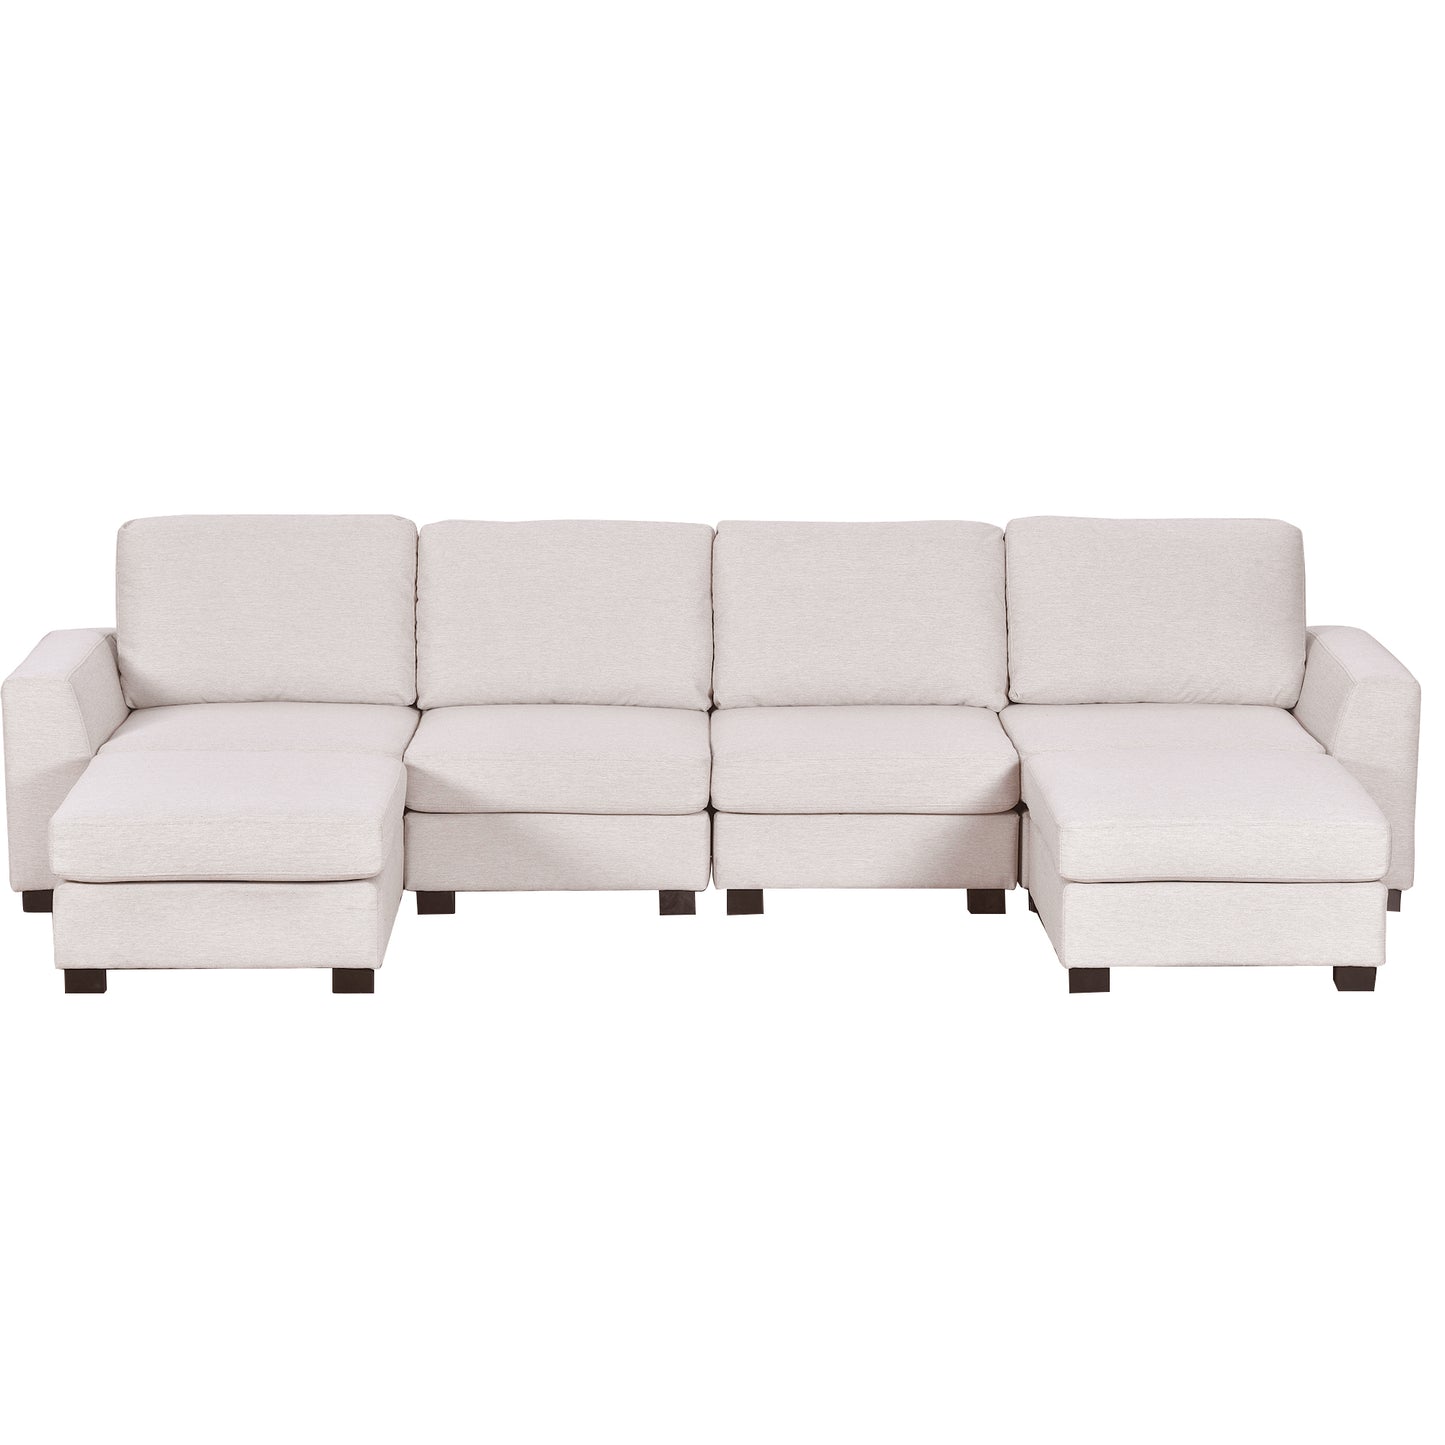 3 Piece U shaped Sofa with Removable Ottomans (Beige)